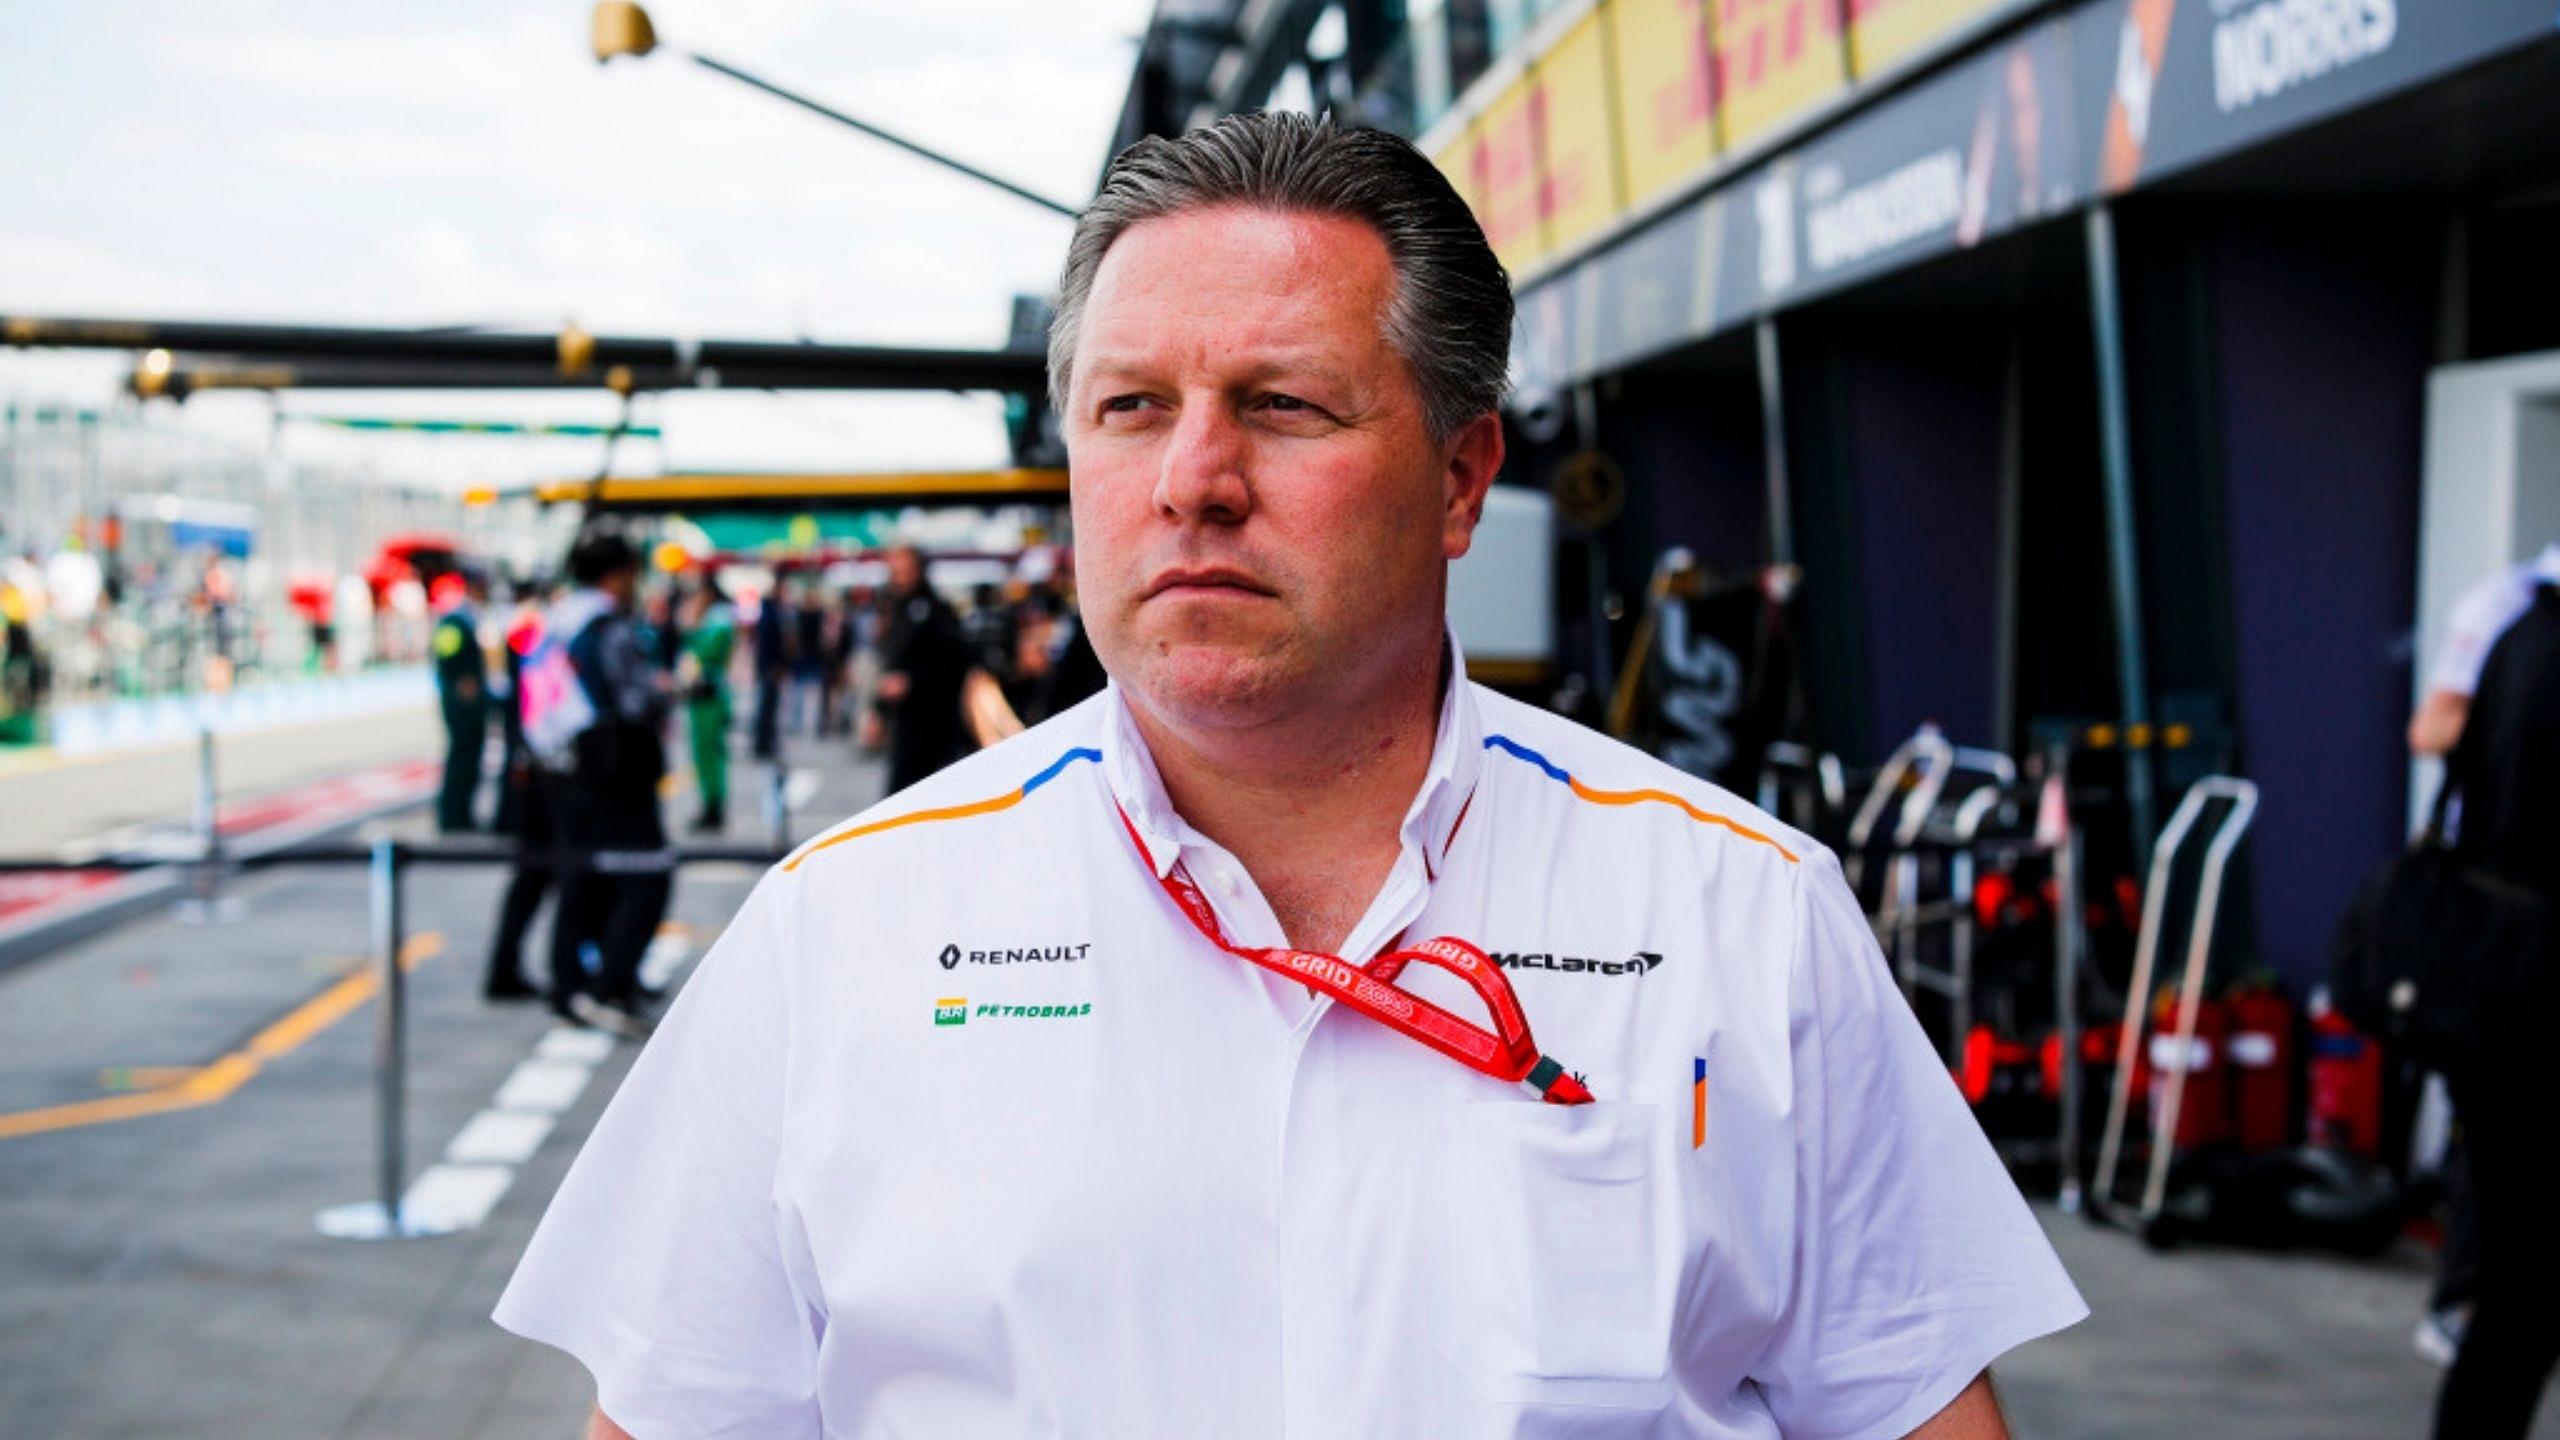 “I think it will be introduced in the next few years" - McLaren CEO Zak Brown proposes a budget cap for driver salaries